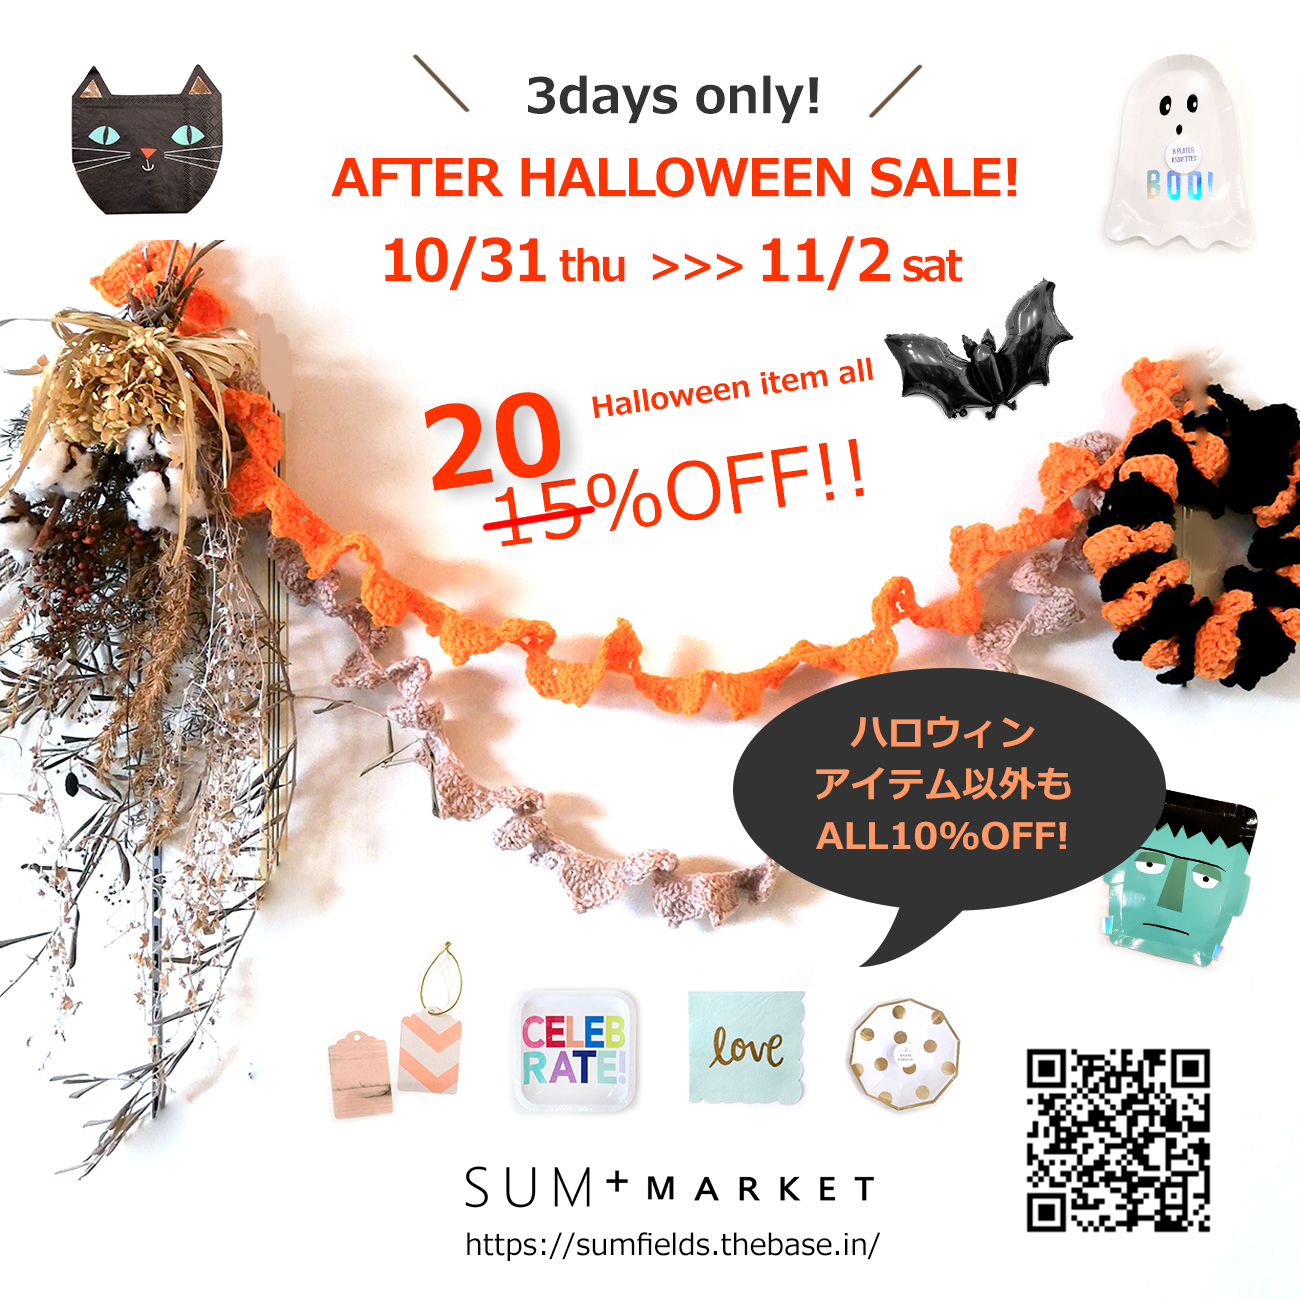 10/31 >>> 11/2★AFTERハロウィンセール開催！